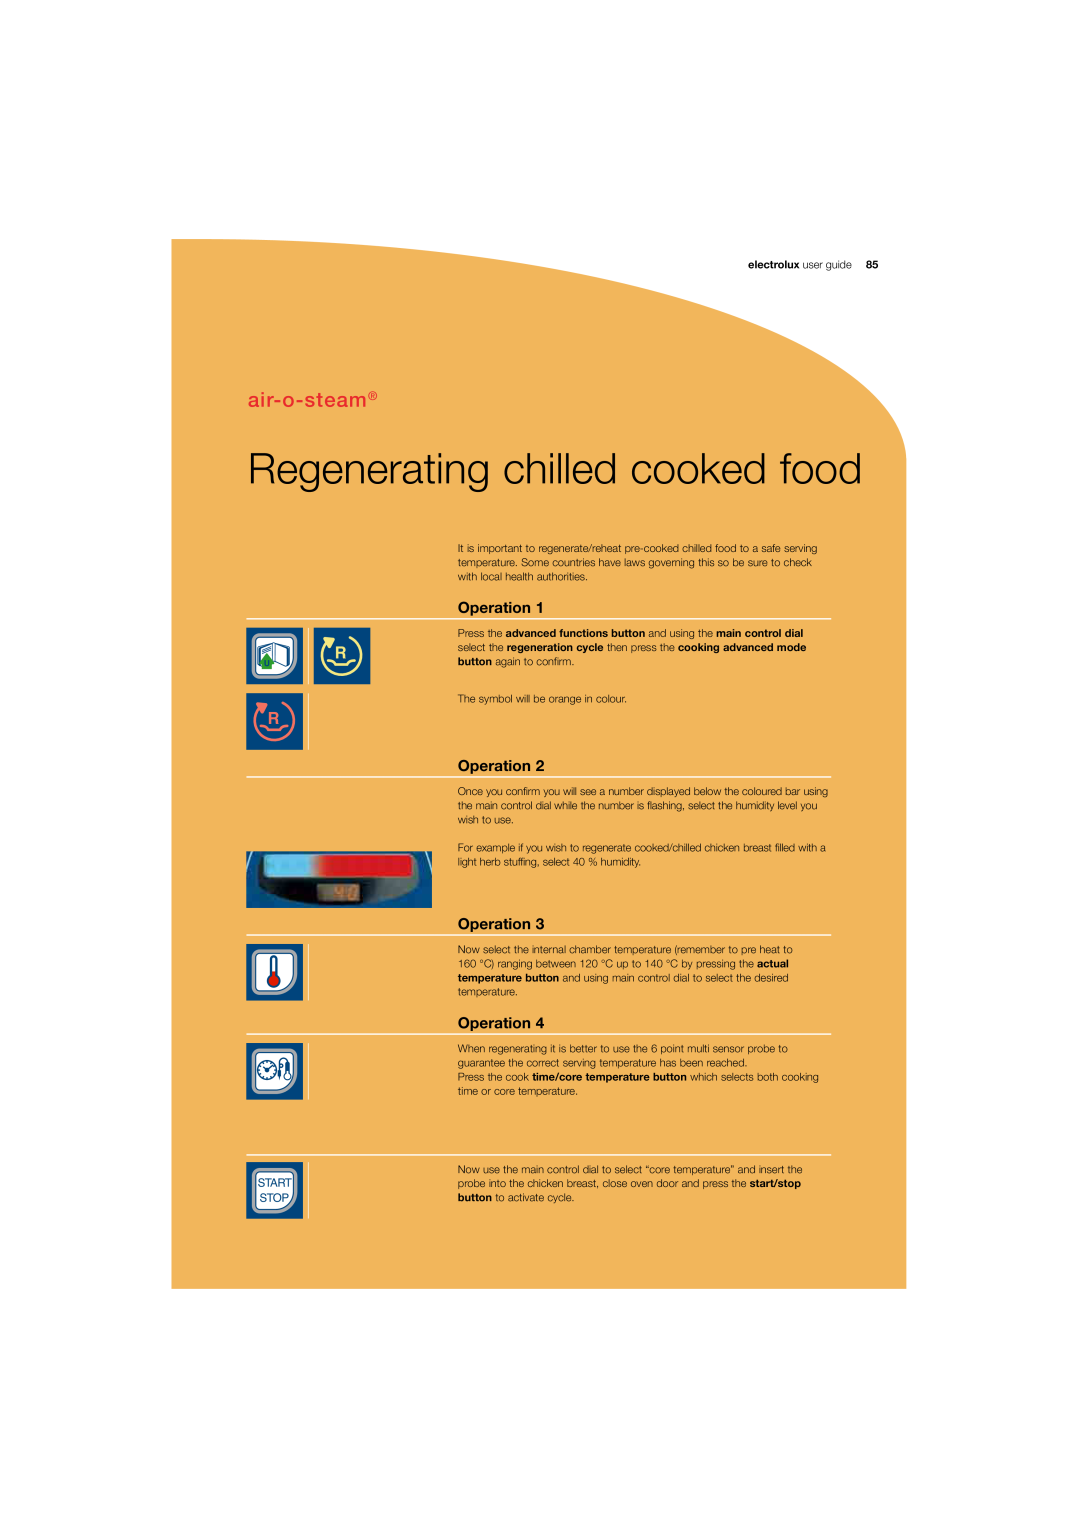 Electrolux 180 manual Regenerating chilled cooked food, air-o-steam, Operation, Start Stop, electrolux user guide 